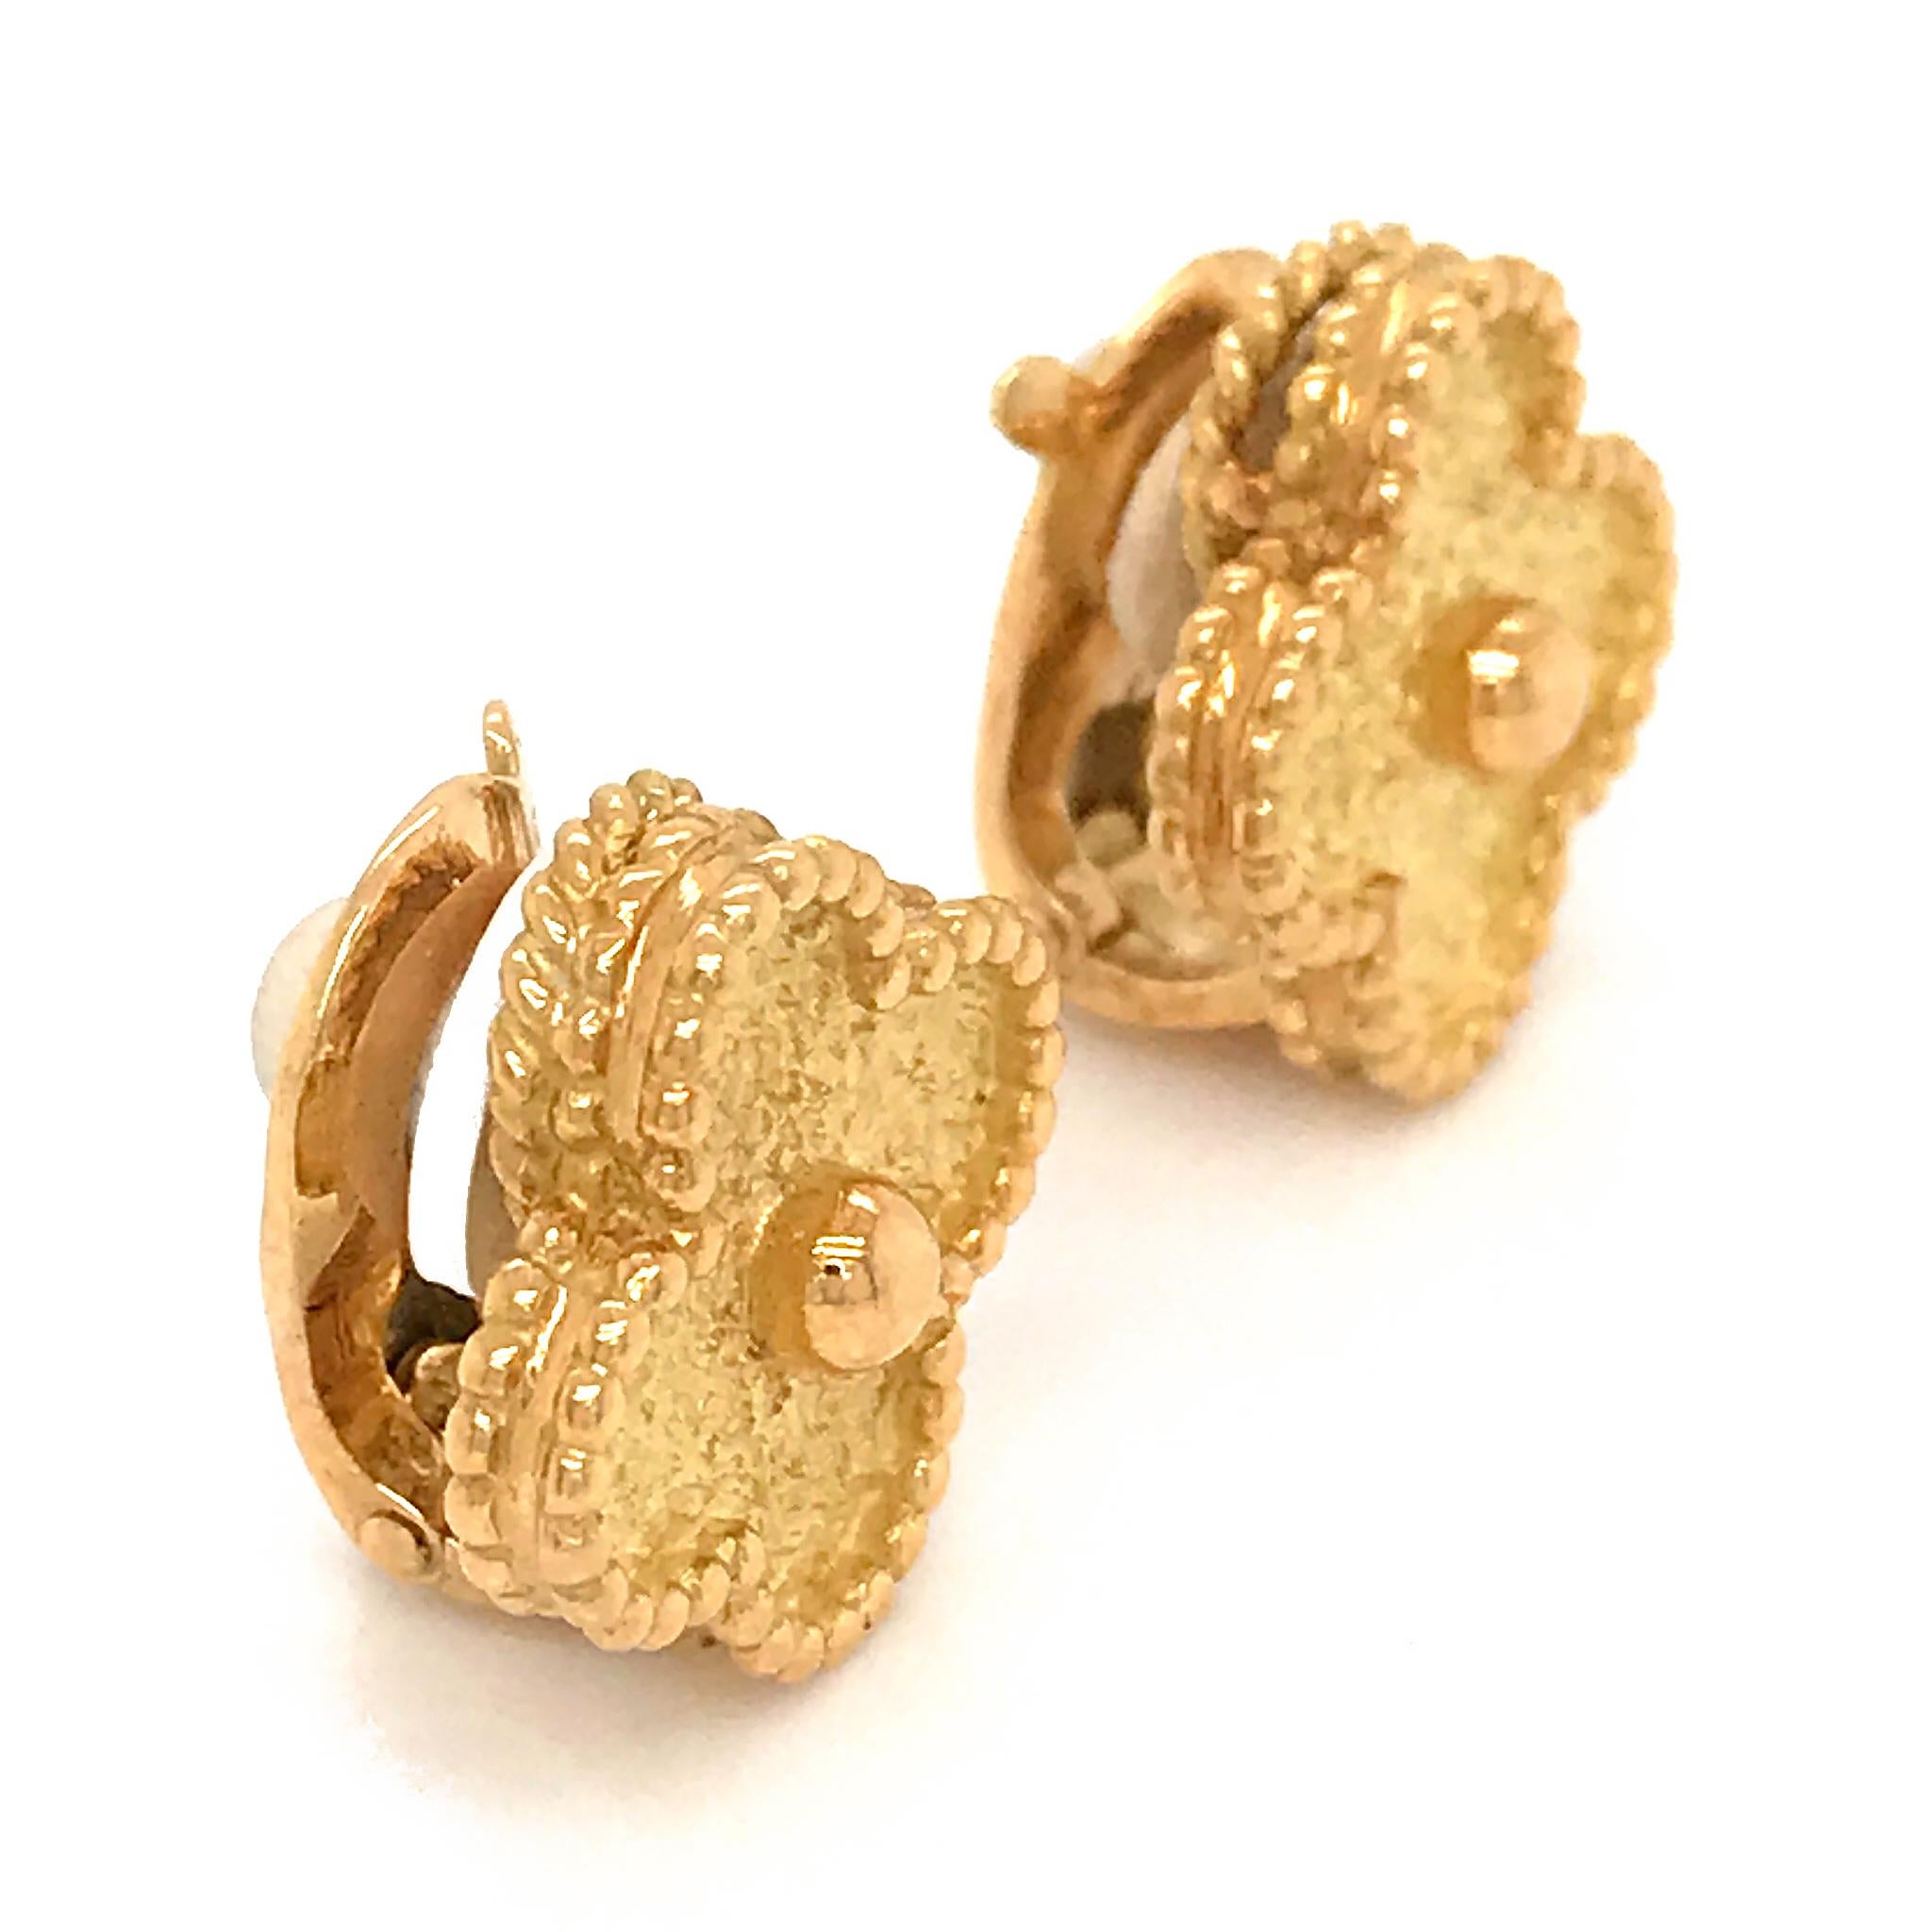 Van Cleef & Arpels
Yellow Gold Vintage Alahambra Clover Clip On Earrings

Yellow gold vintage Alhambra earrings in 18K Yellow Gold.
W: 14.7mm
8.2gr
Omega closure with rubber insert.
Fully hallmarked.
Condition: Excellent.

VCA box not included. Wil